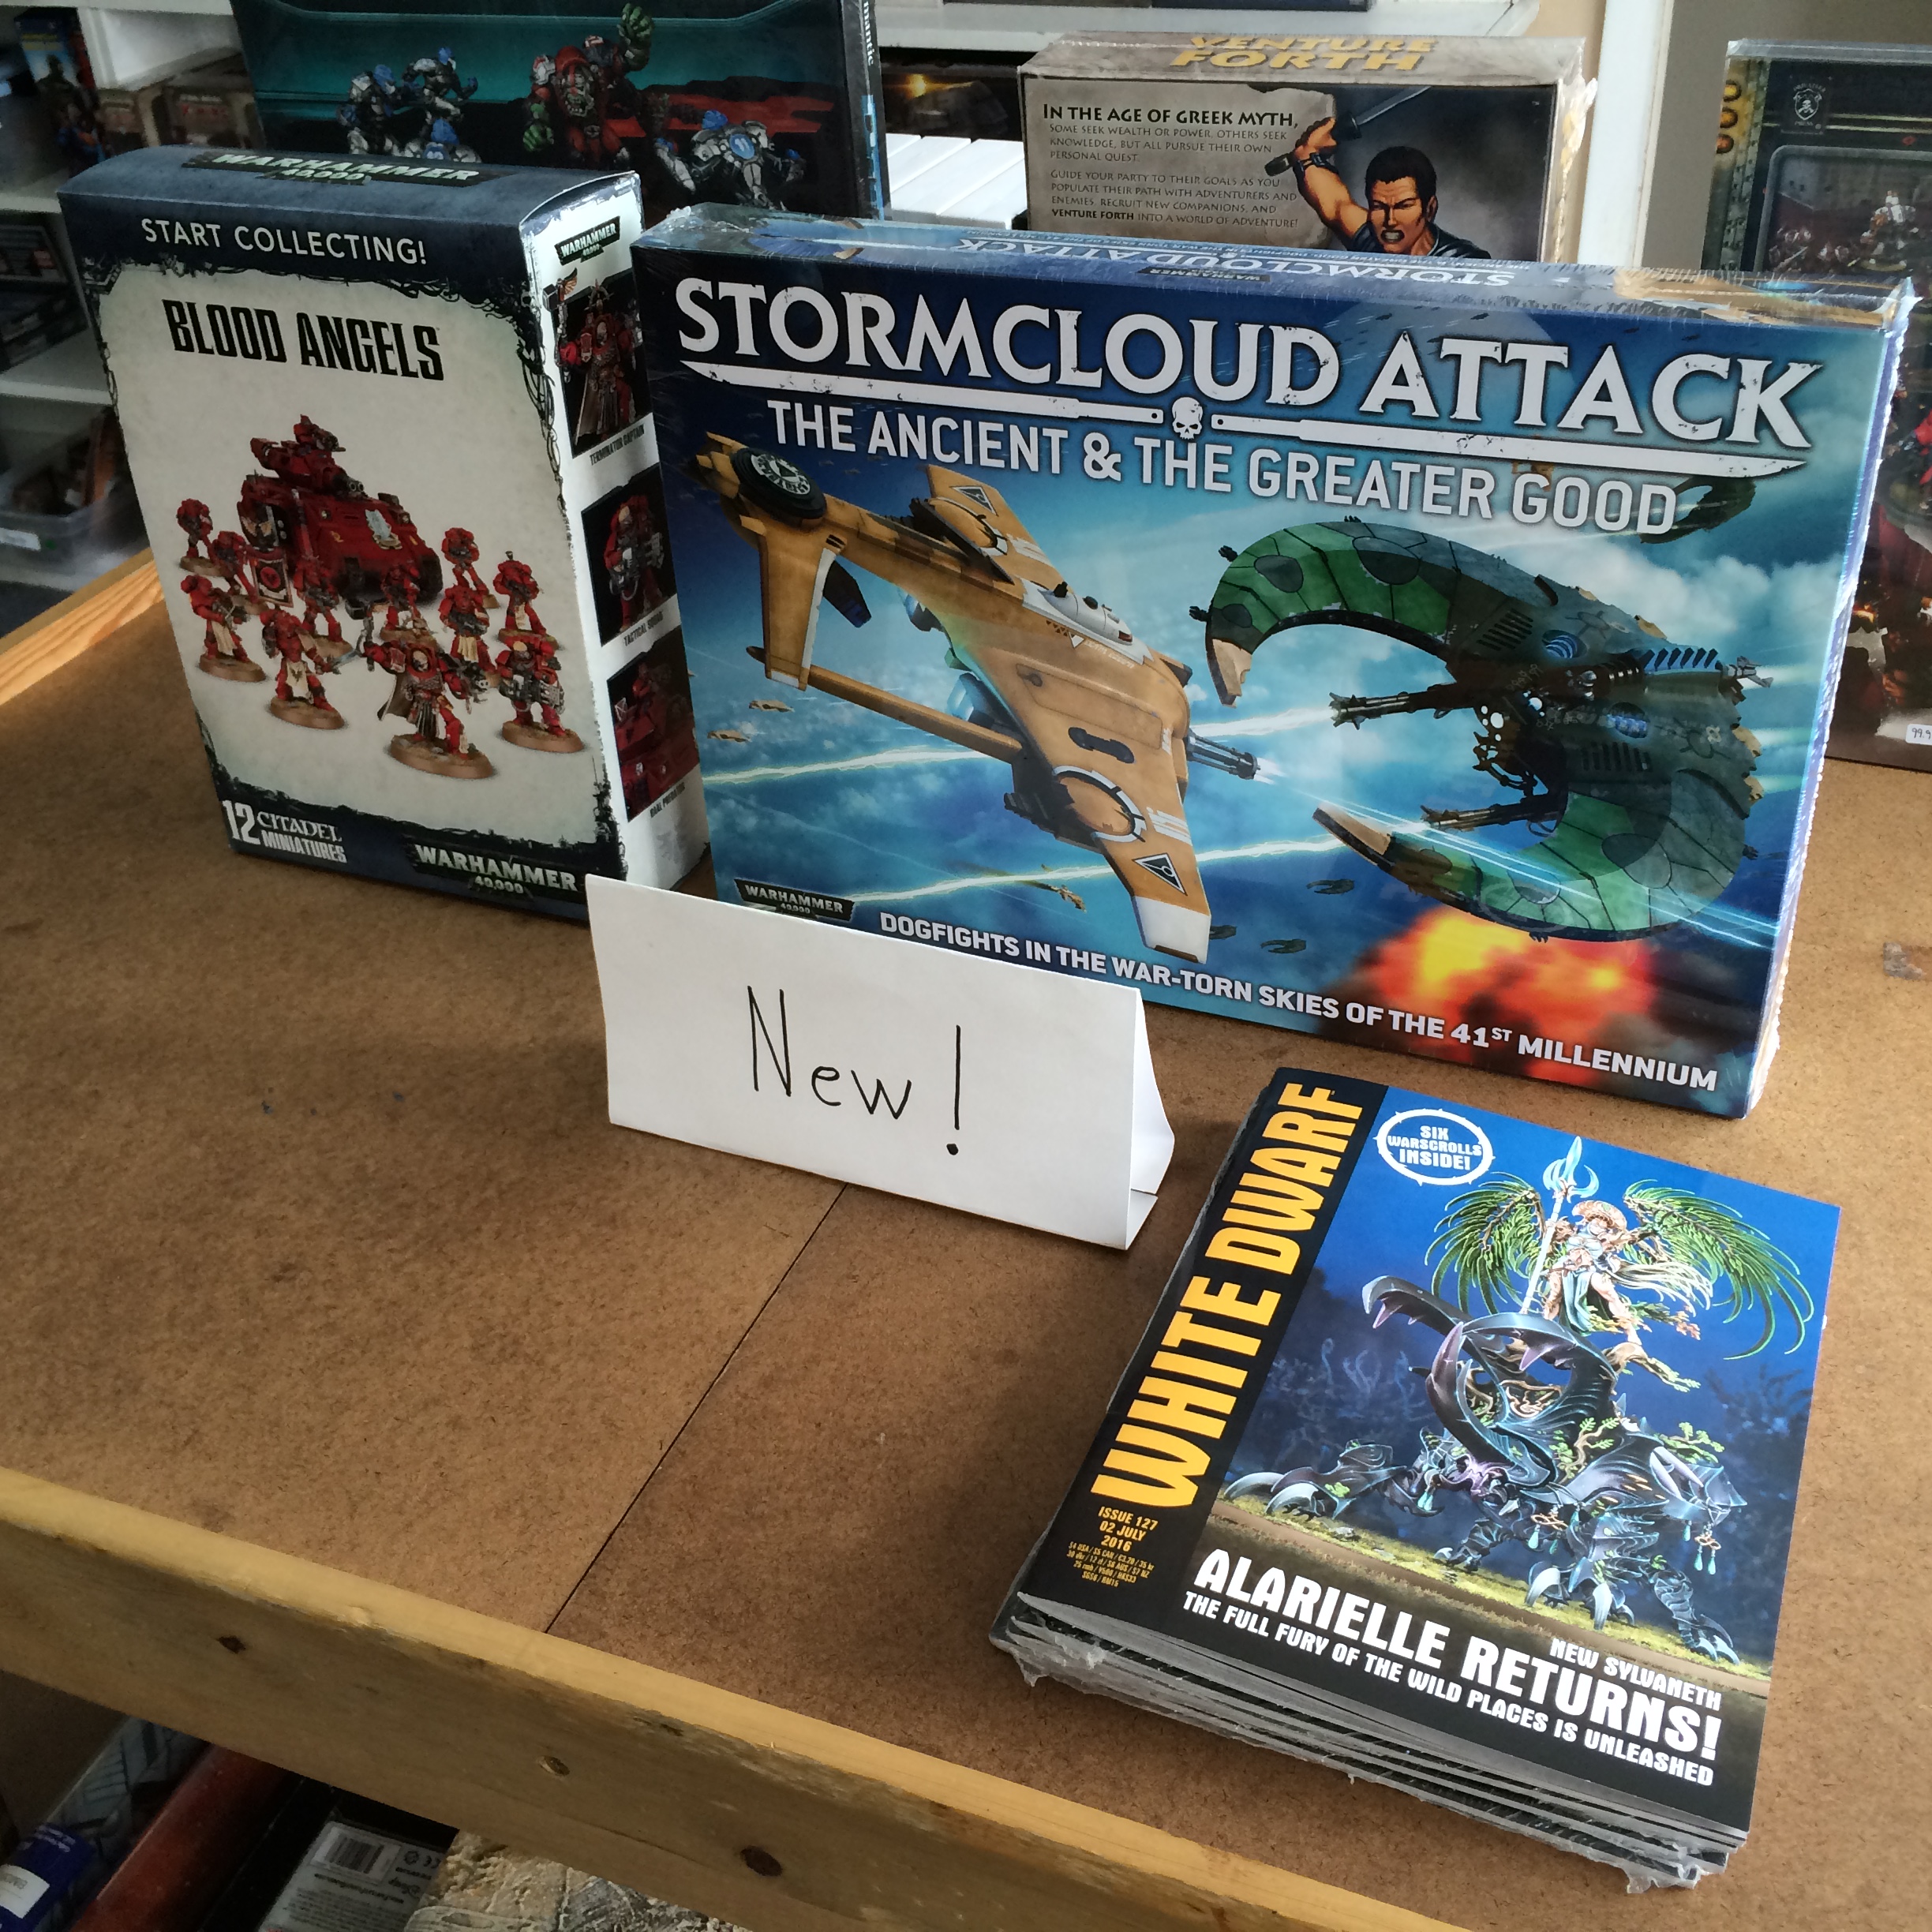 Stormcloud Attack and Start Collecting Blood Angels!